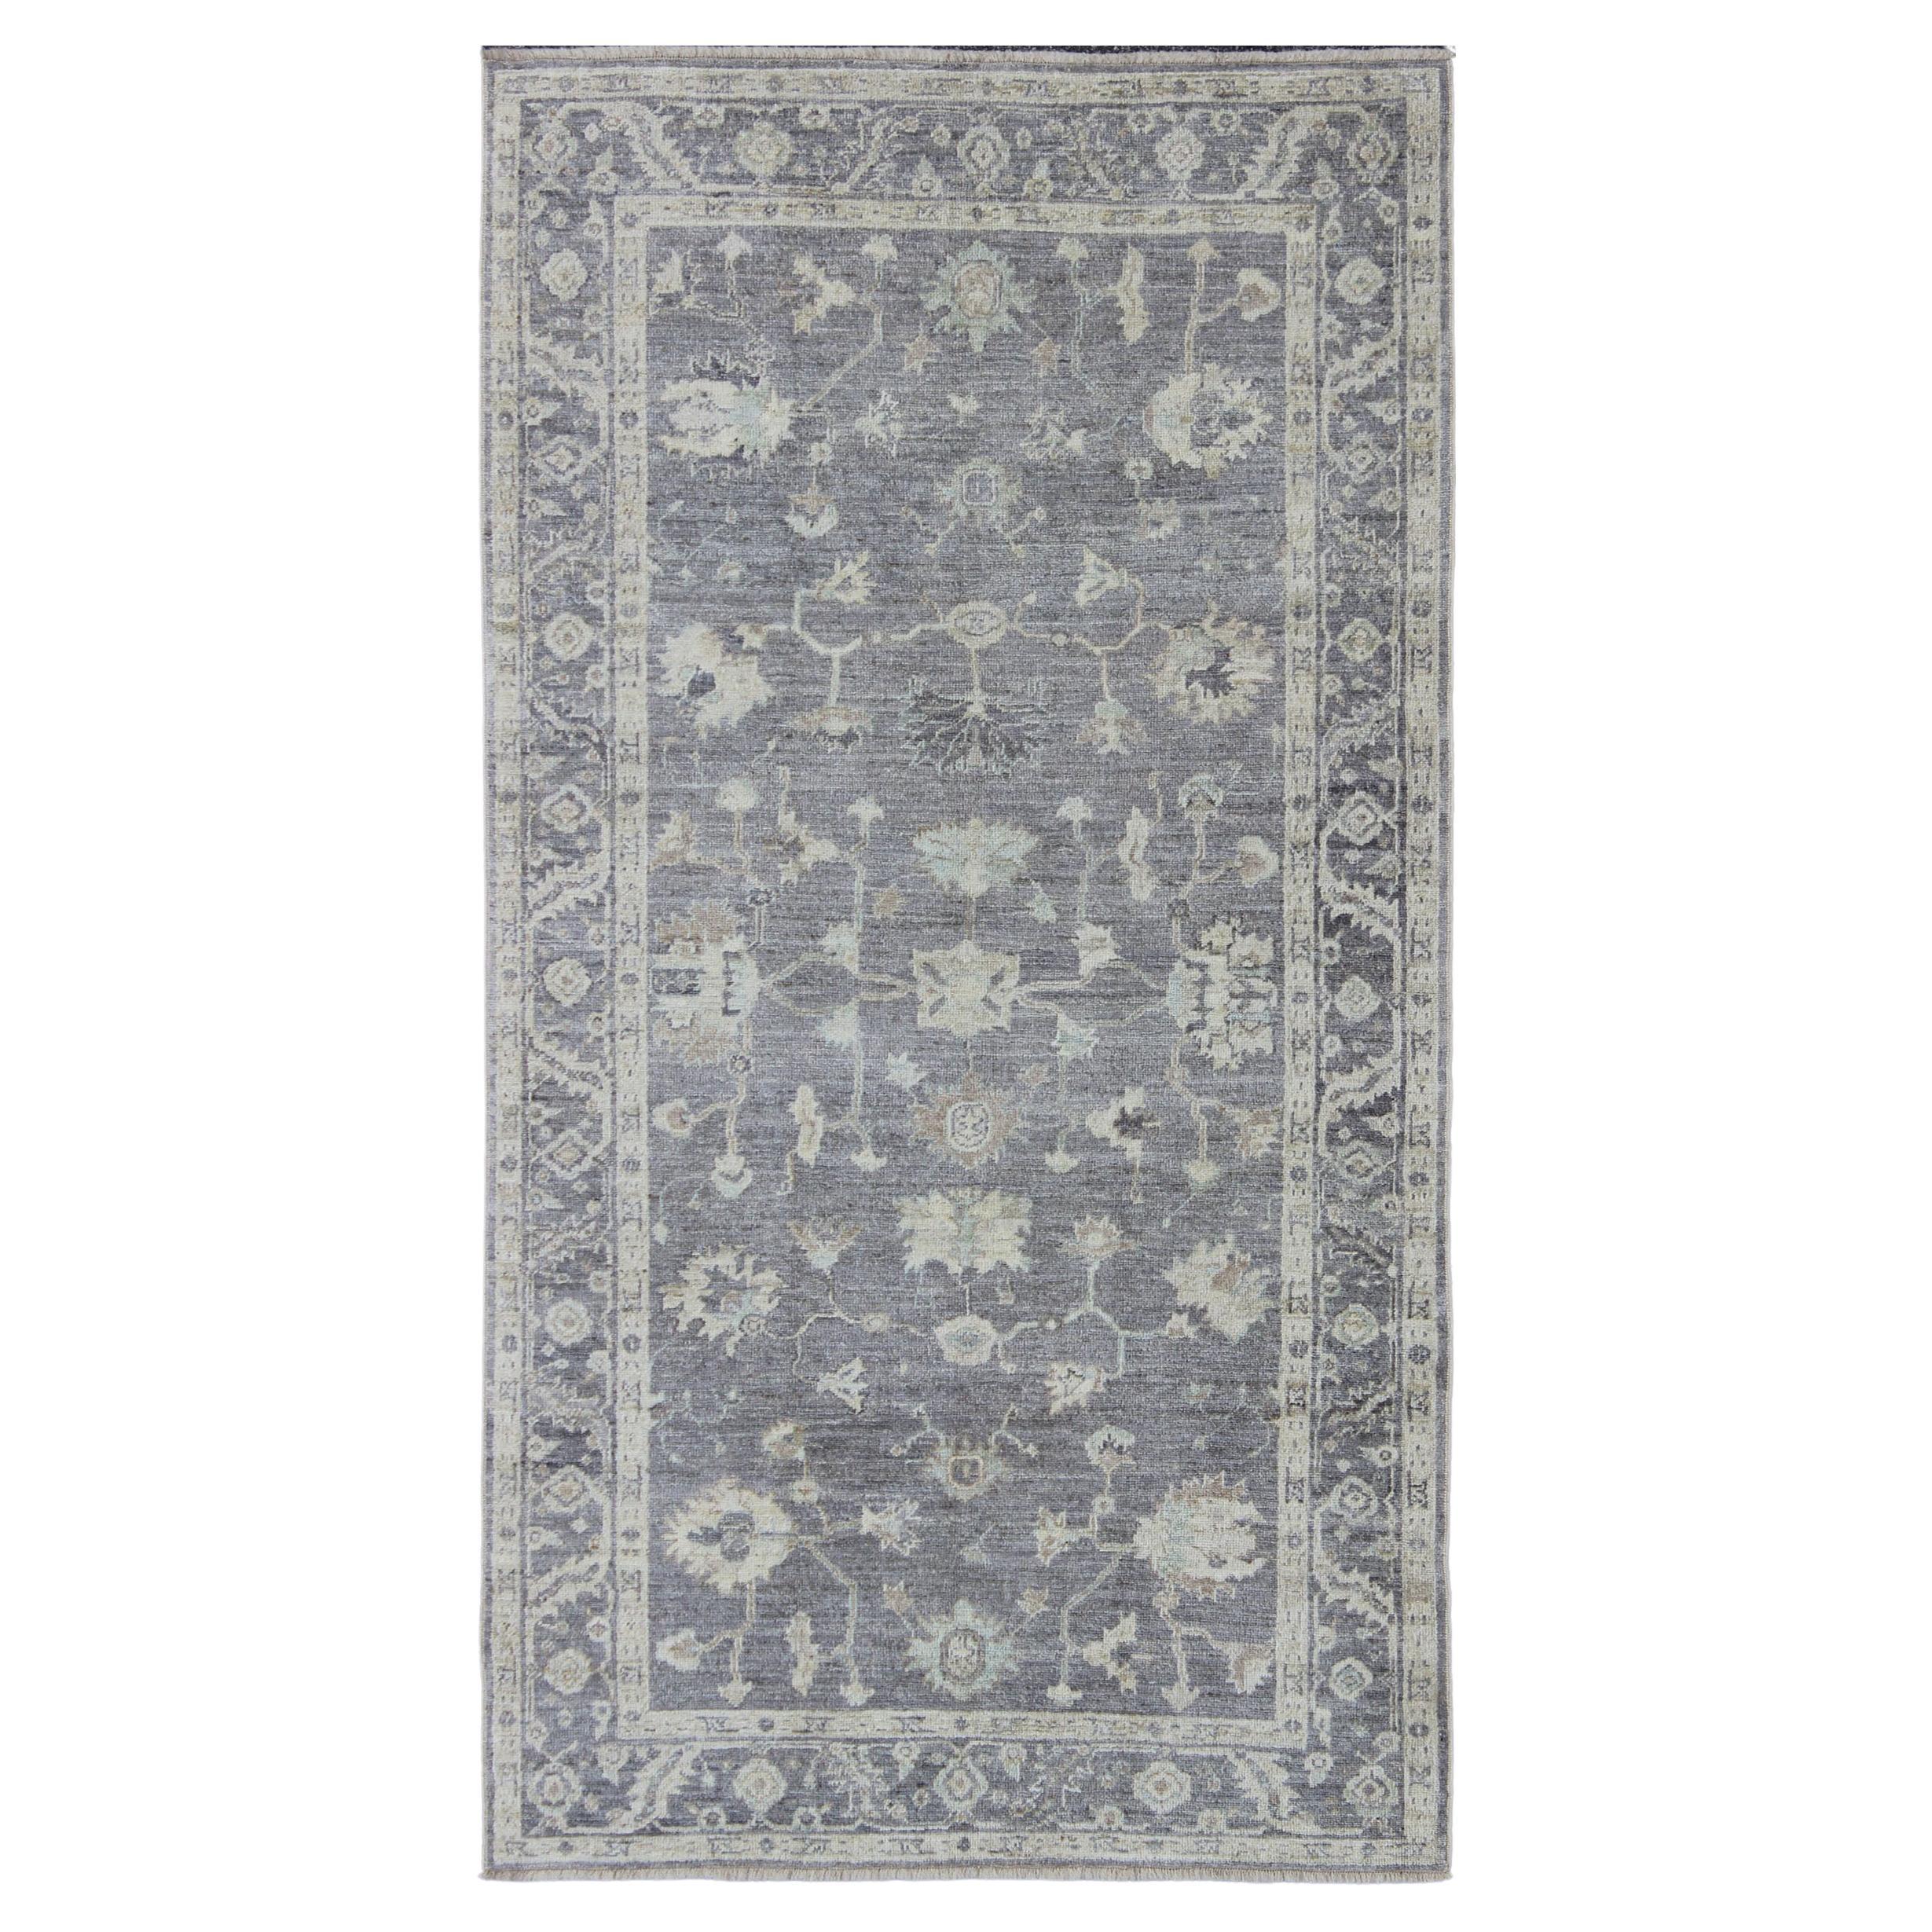 Angora Oushak Turkish Gallery Rug in Shades of Gray, Ivory, Silver